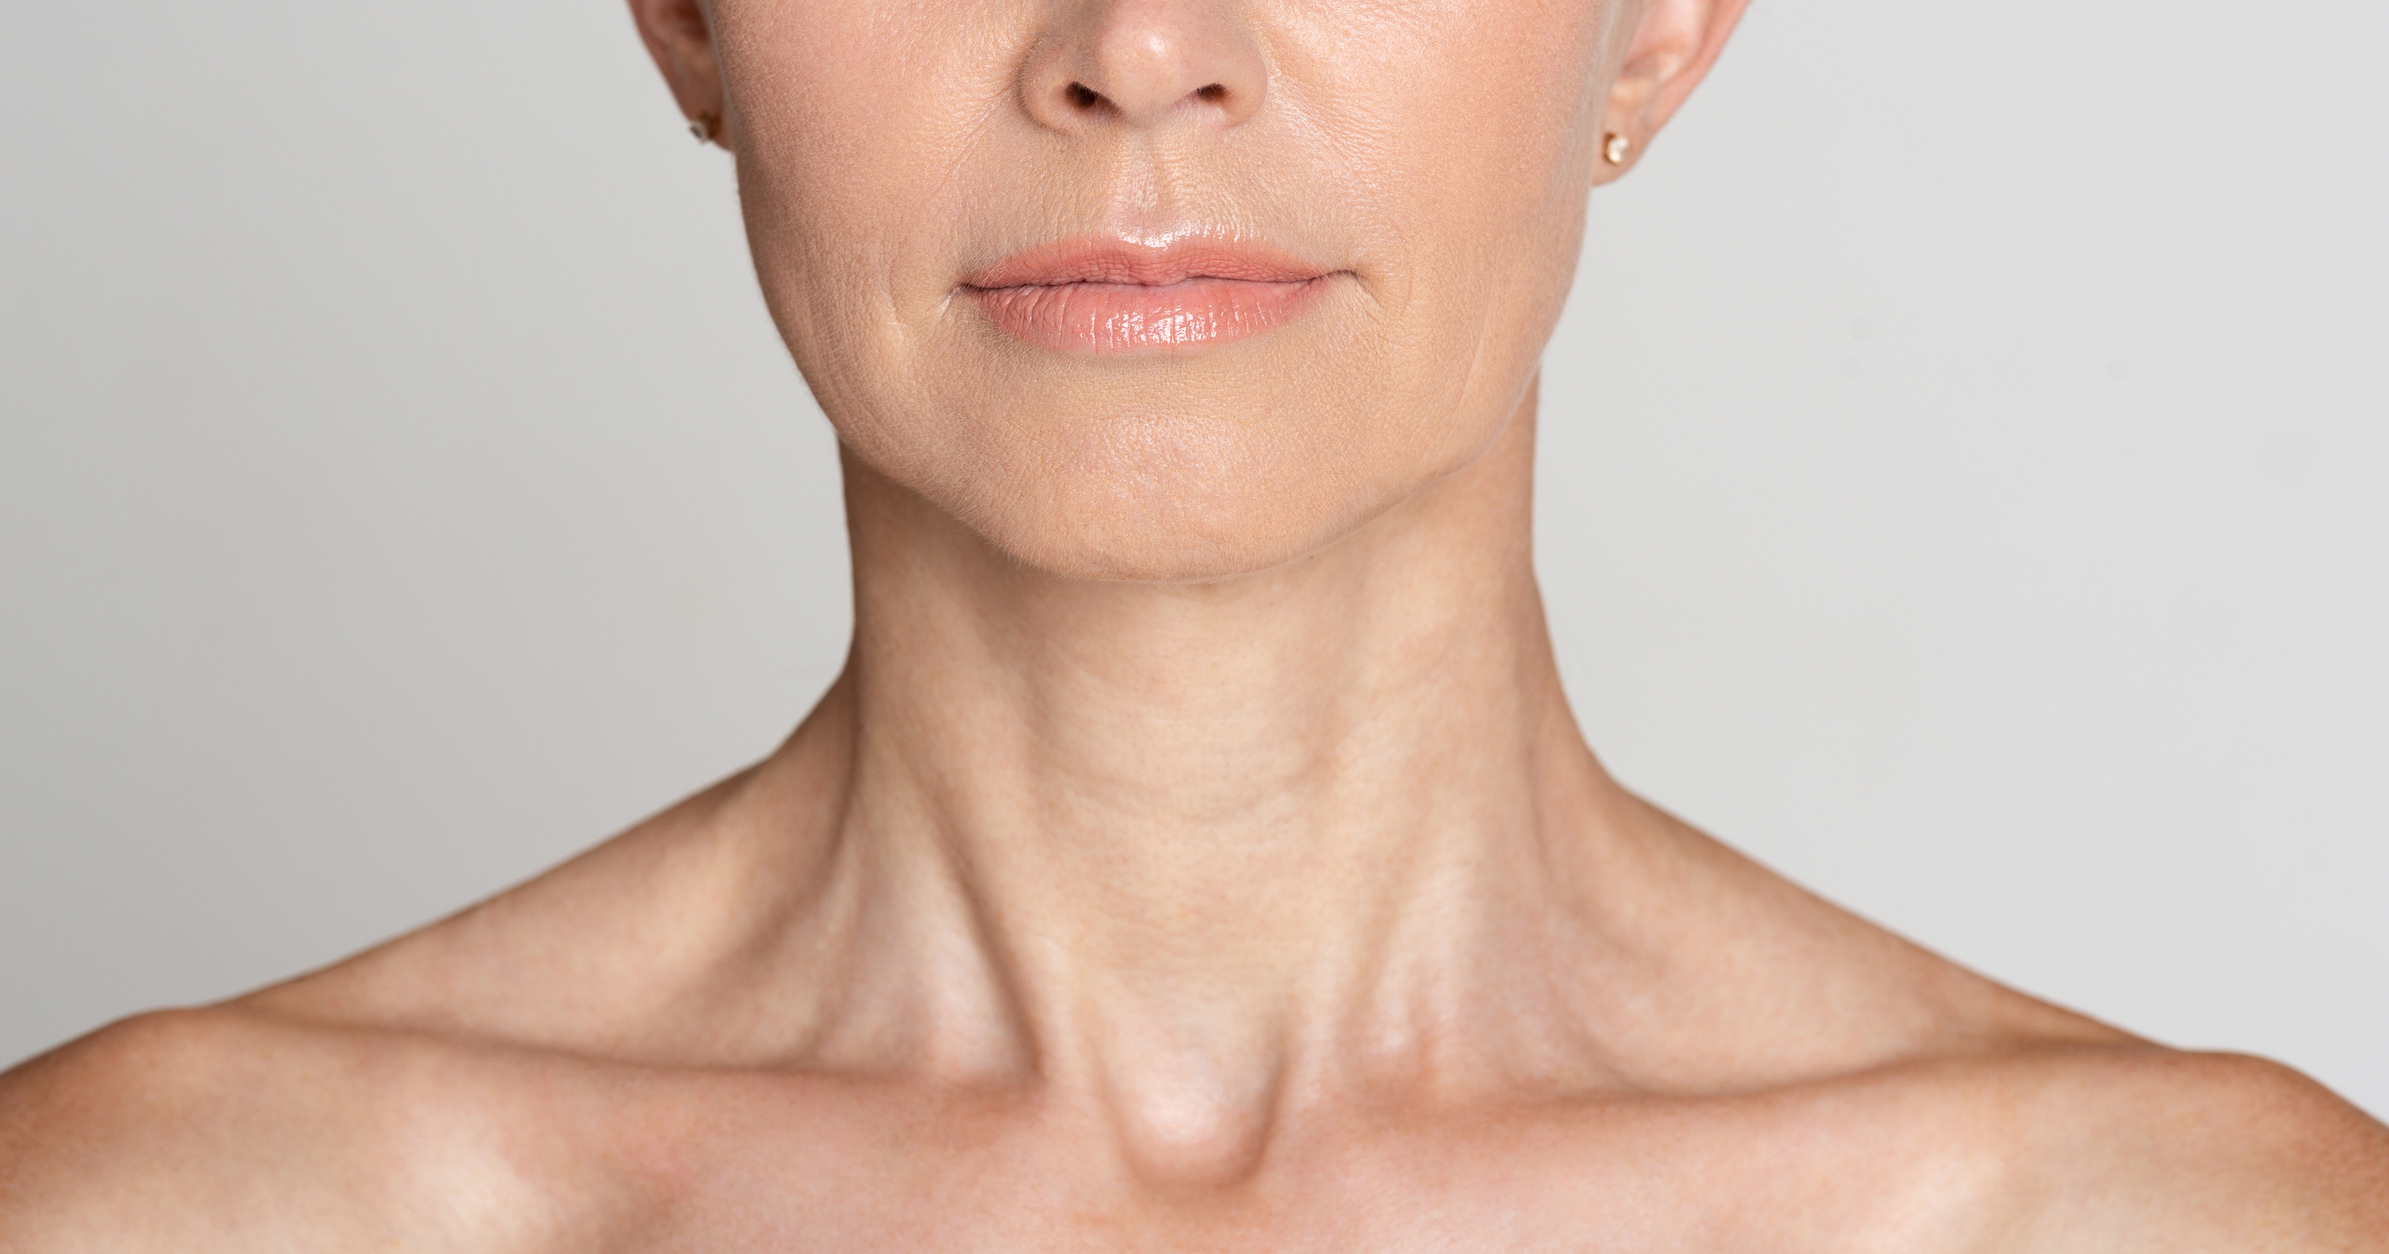 Minimally Invasive Neck Lift | Half face portrait of mature woman with wrinkled neck, grey background, crop